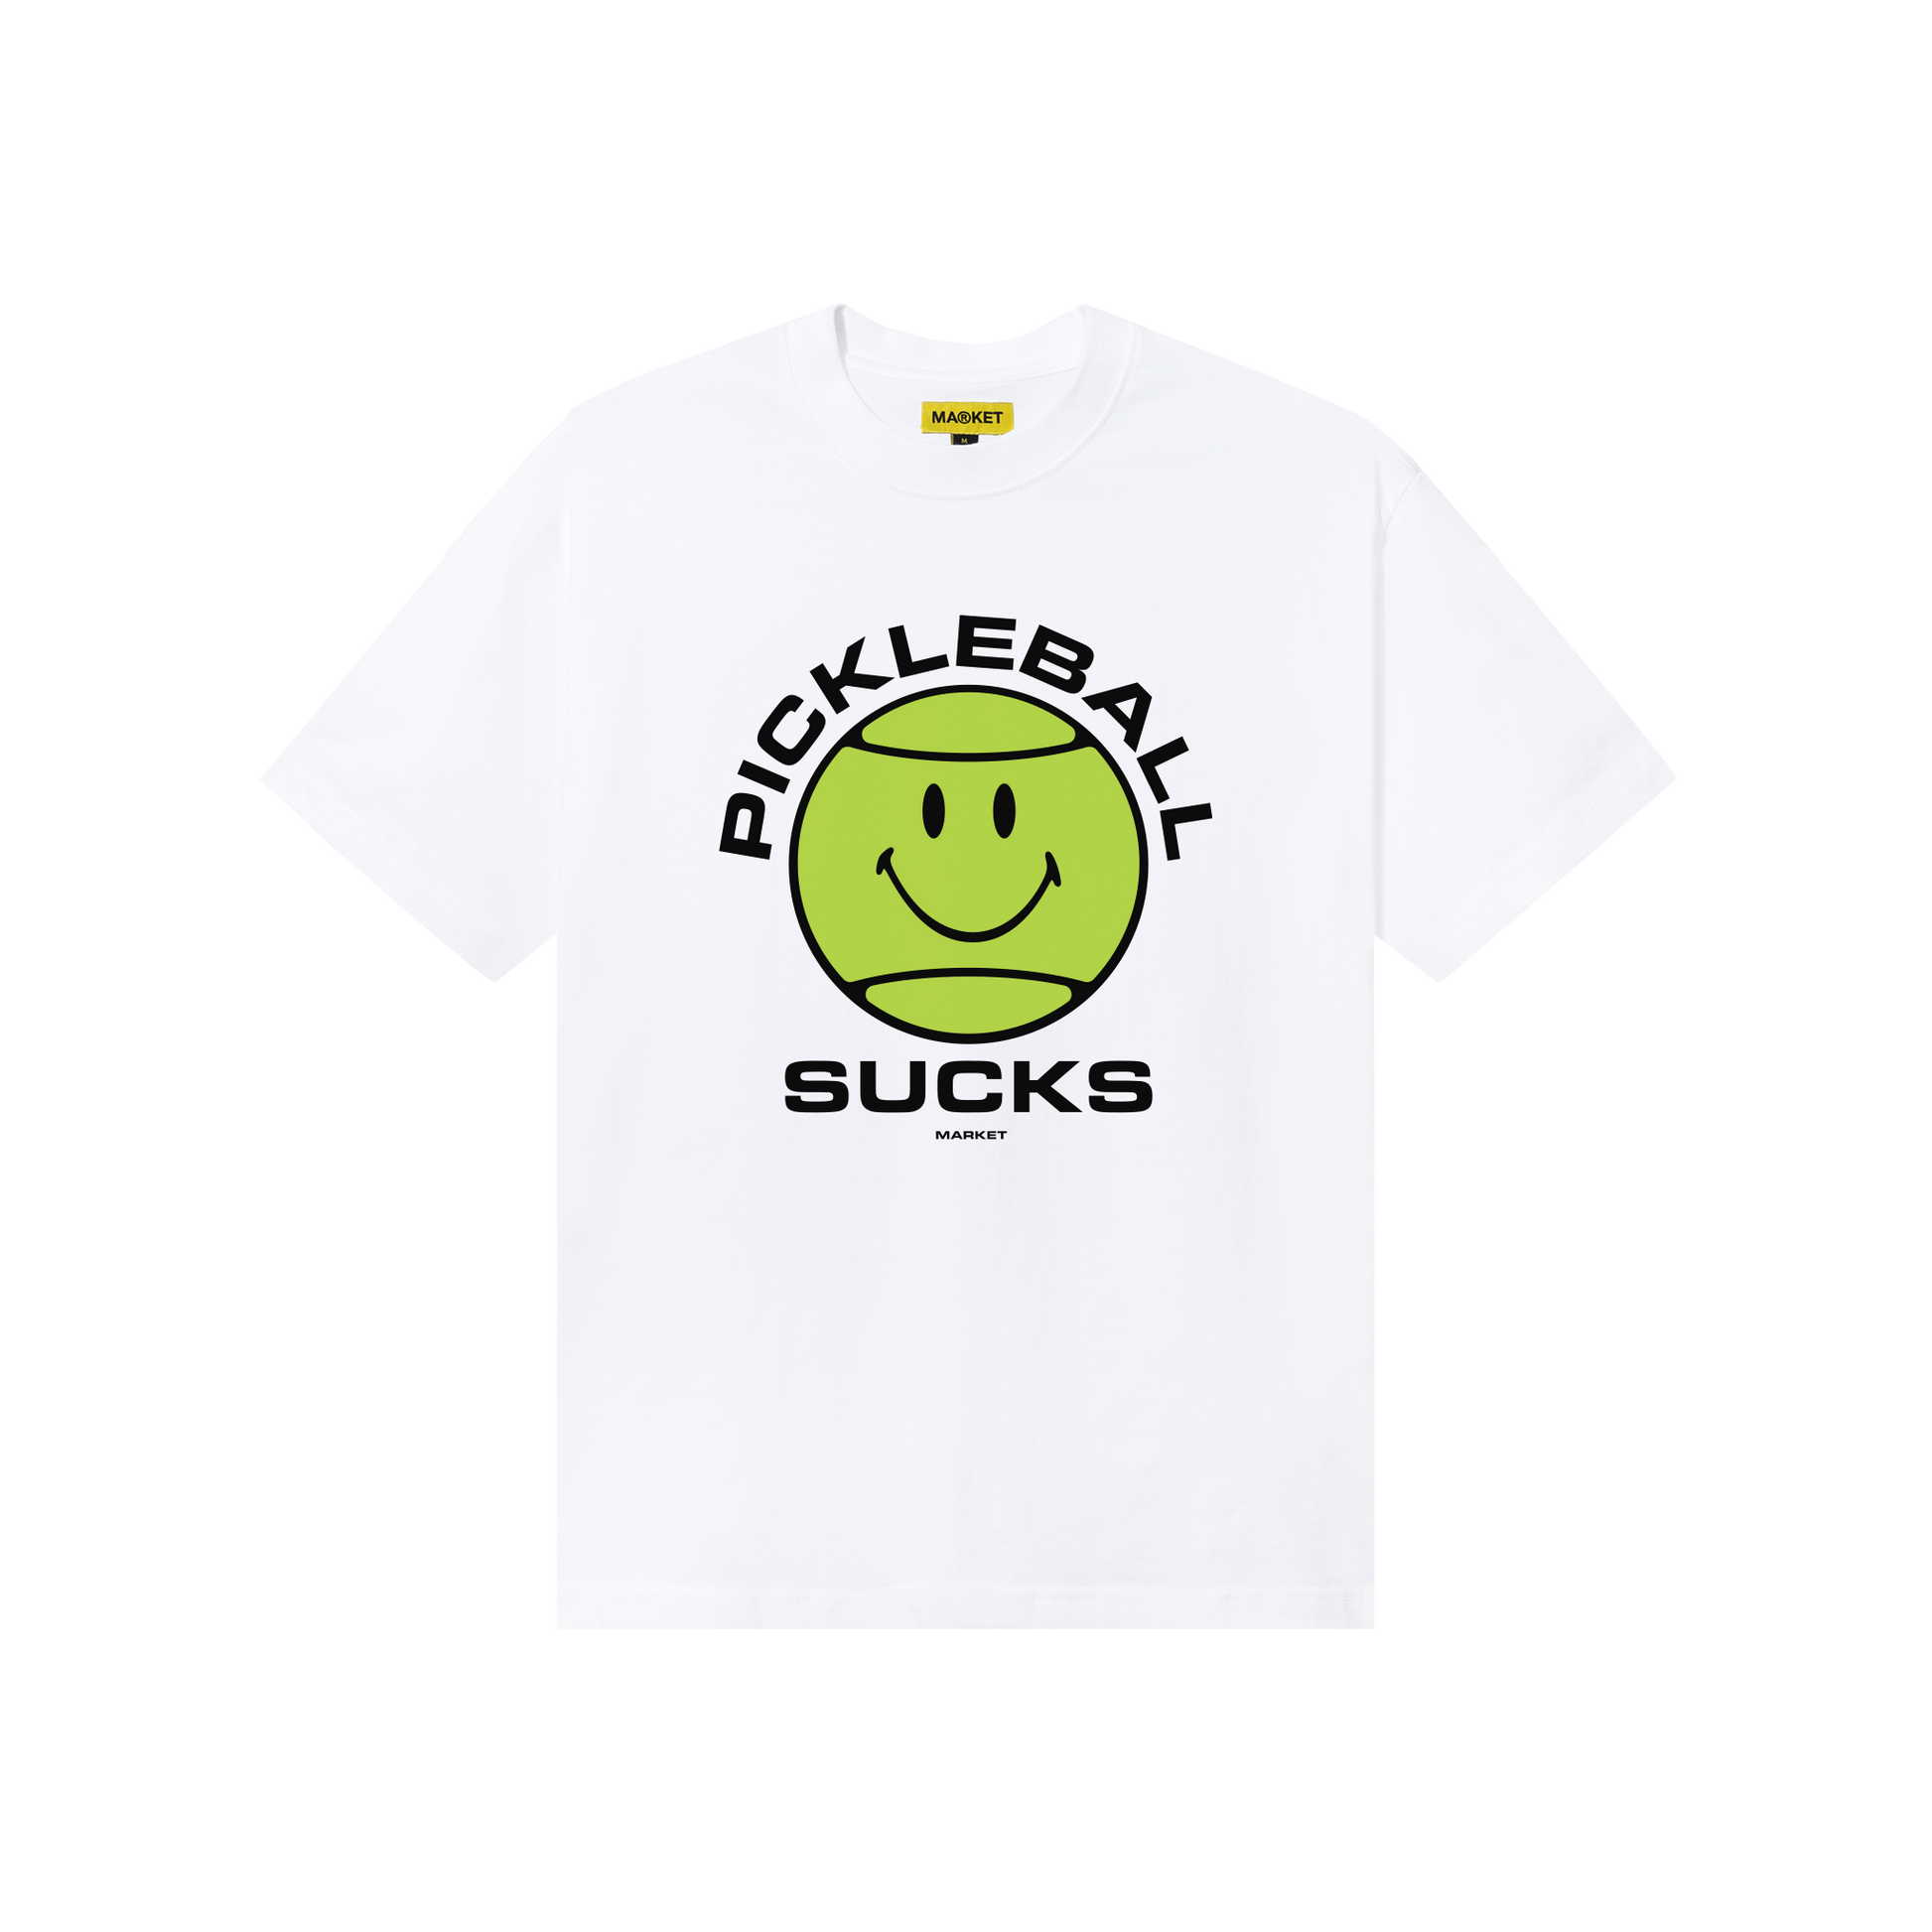 MARKET clothing brand SMILEY PICKLEBALL SUCKS T-SHIRT. Find more graphic tees, hats, hoodies and more at MarketStudios.com. Formally Chinatown Market.